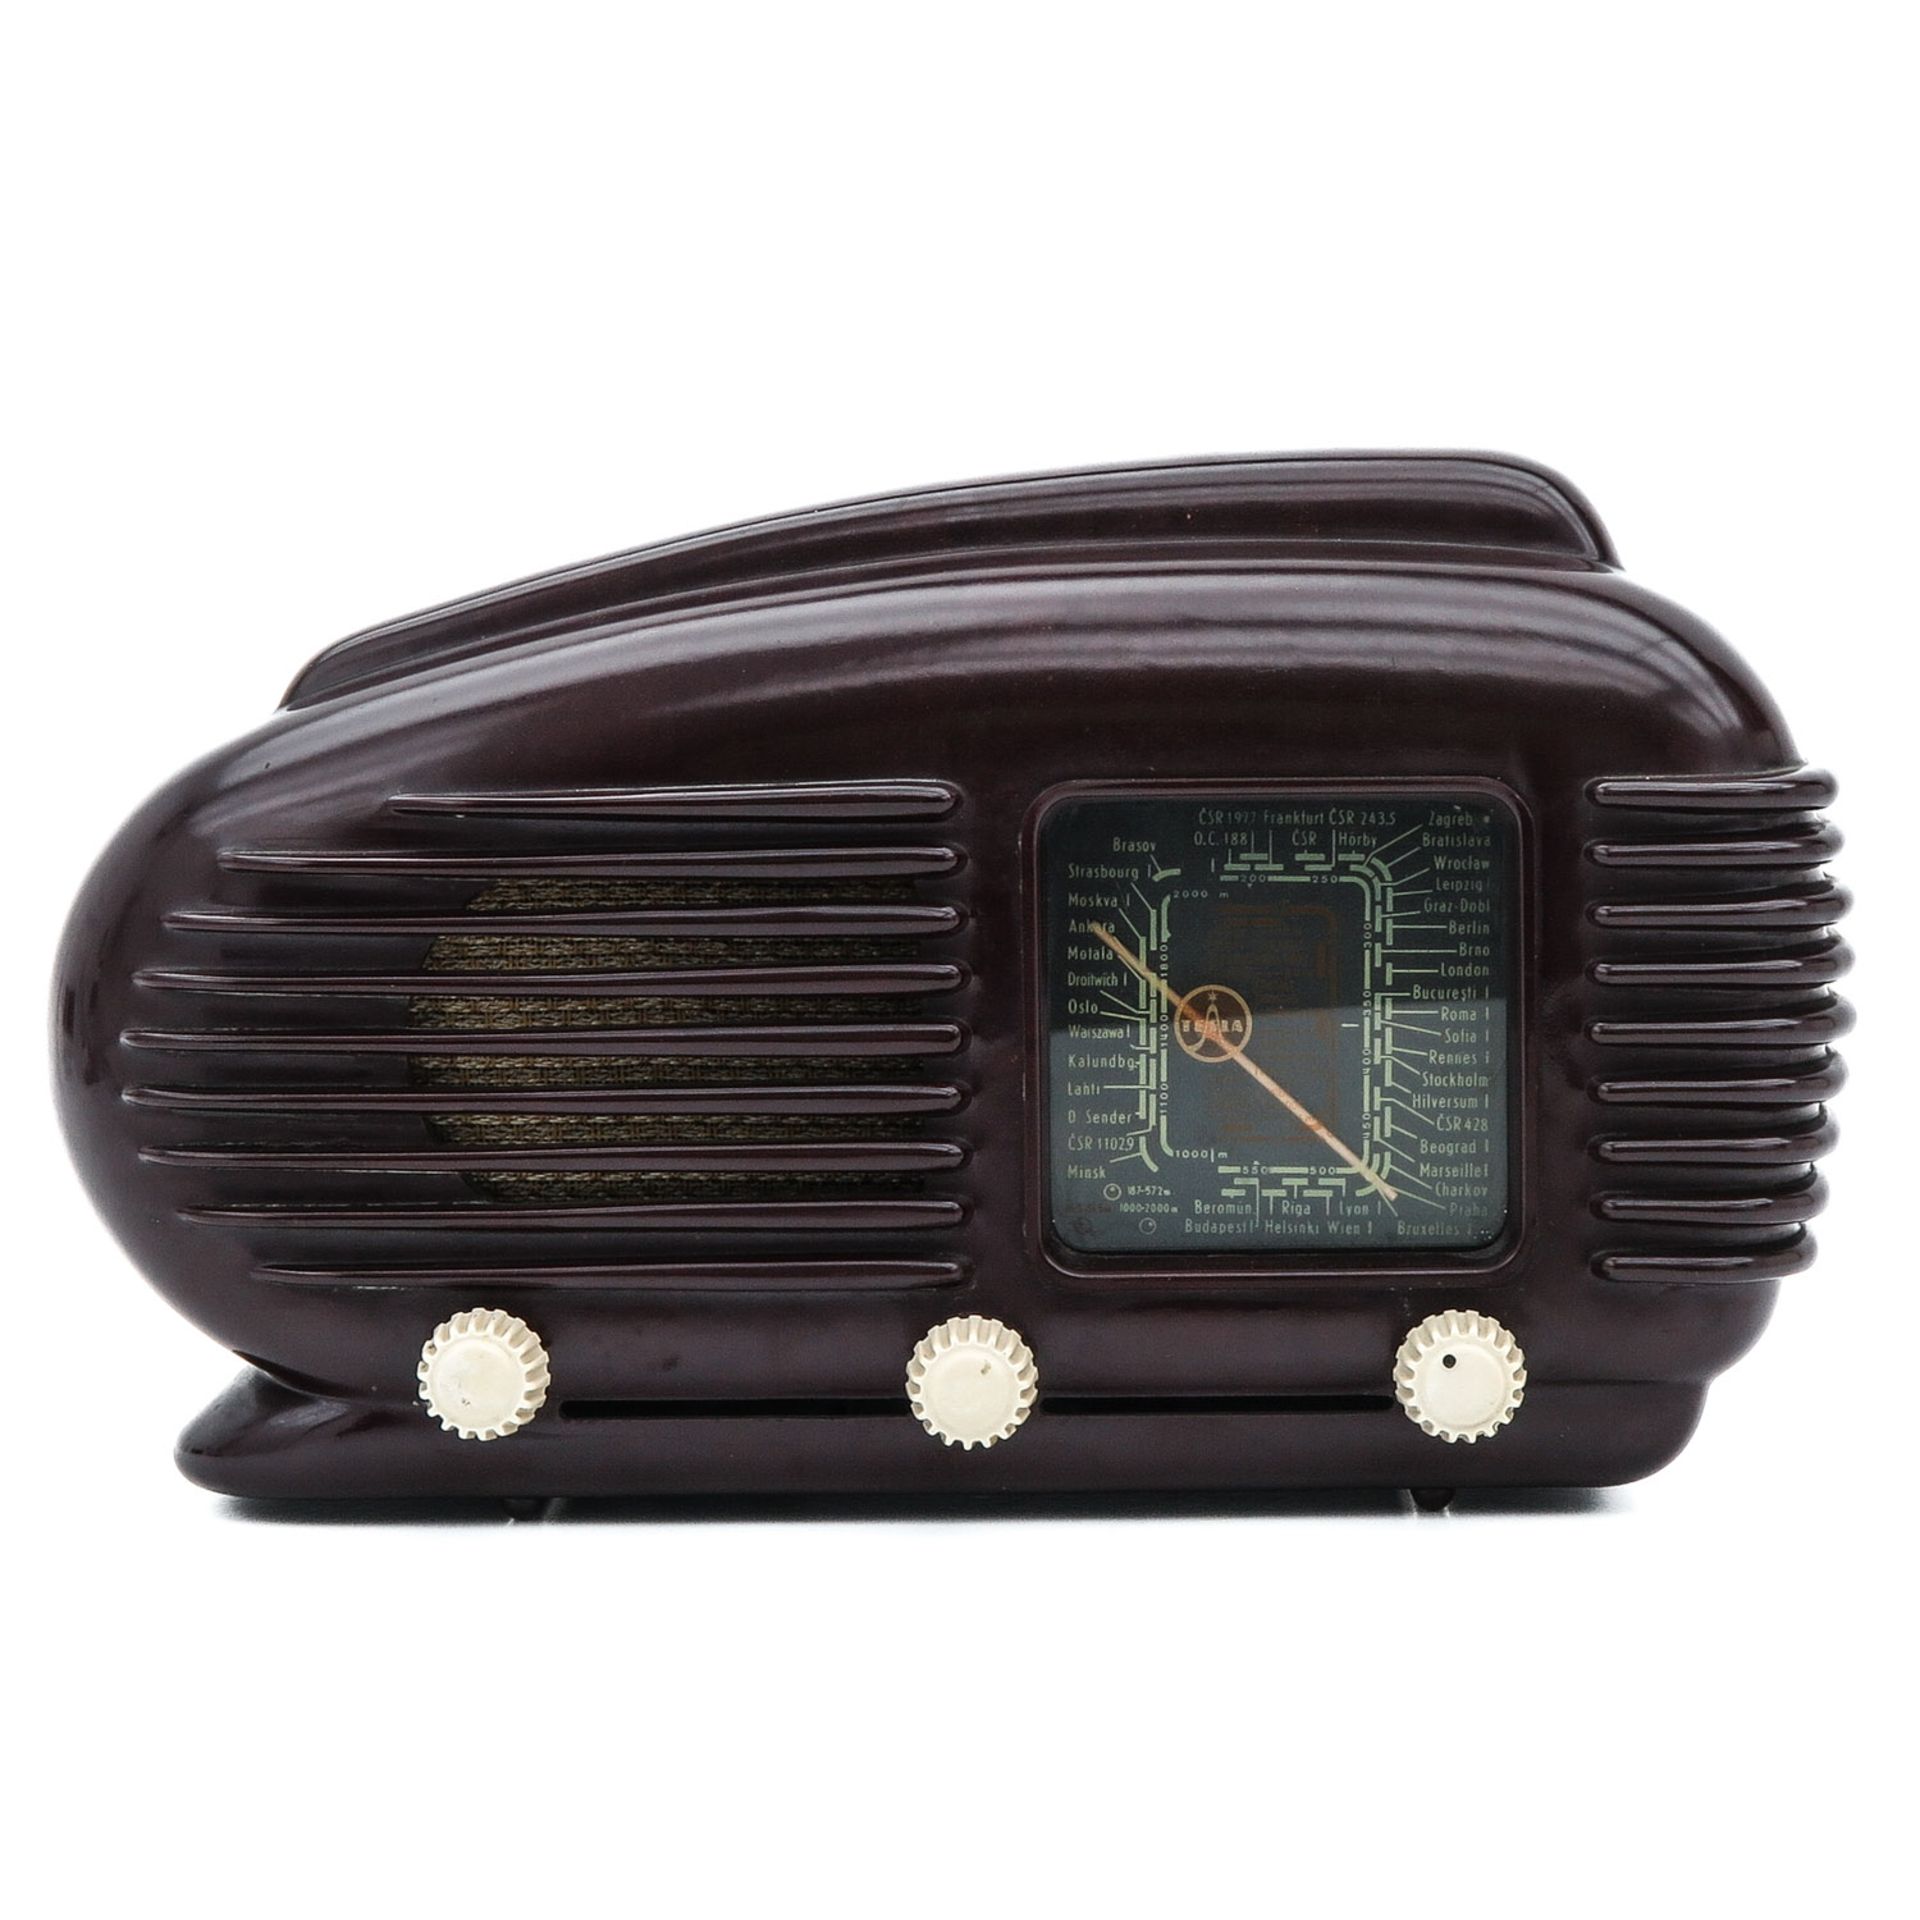 A Collection of 5 Bakelite Radios - Image 4 of 7